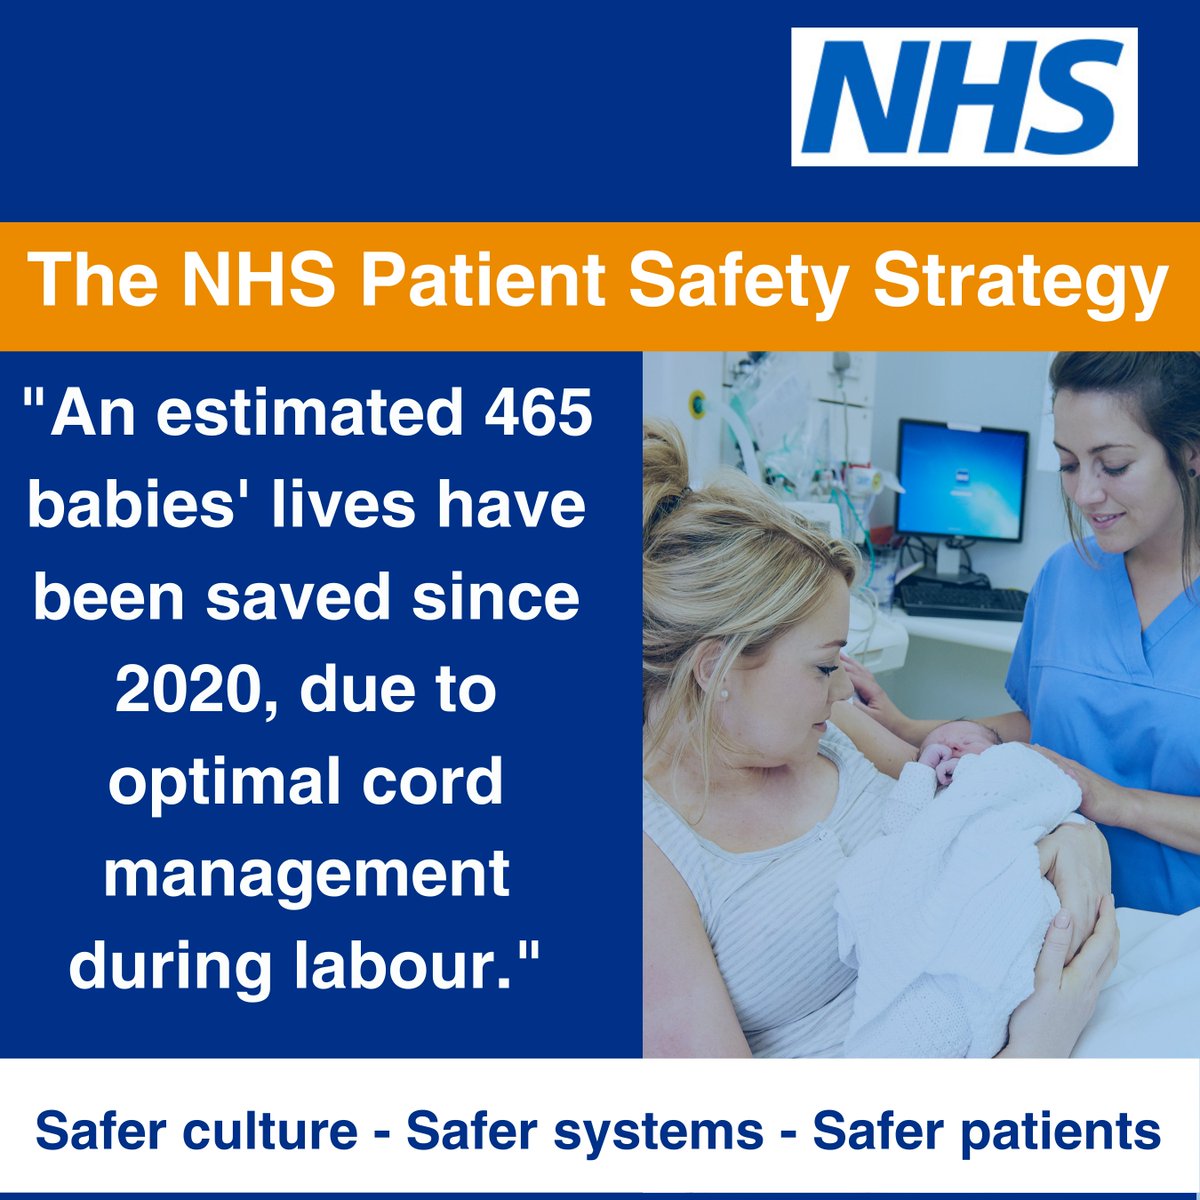 Our new NHS #PatientSafety strategy case studies share examples of the impact the strategy is having, including an estimated 465 babies lives saved since 2020, due to optimal cord management during labour. england.nhs.uk/long-read/savi…